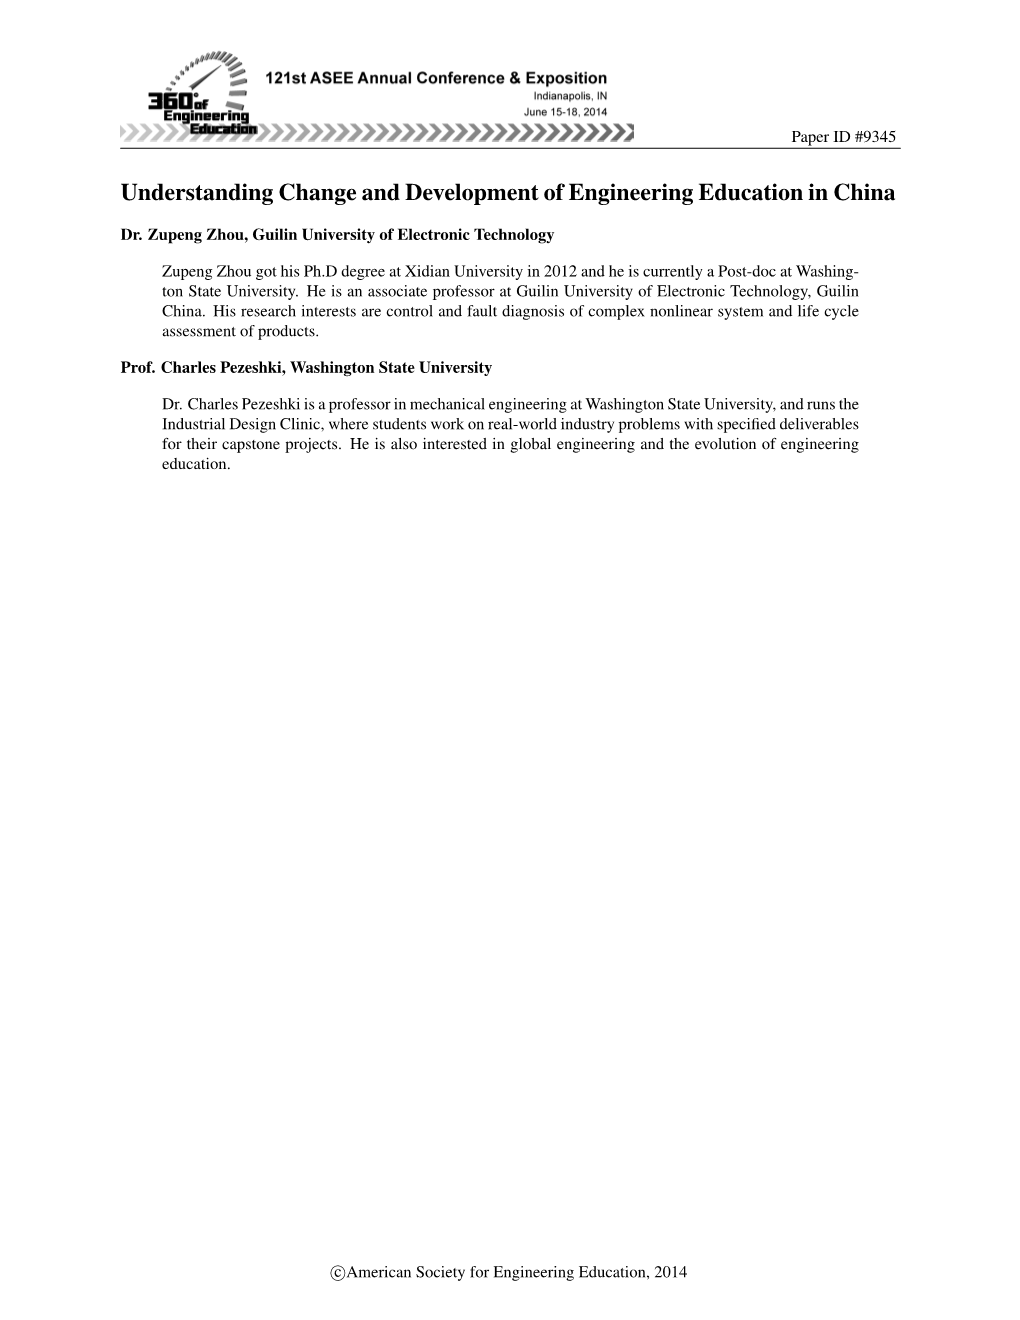 Understanding Change and Development of Engineering Education in China